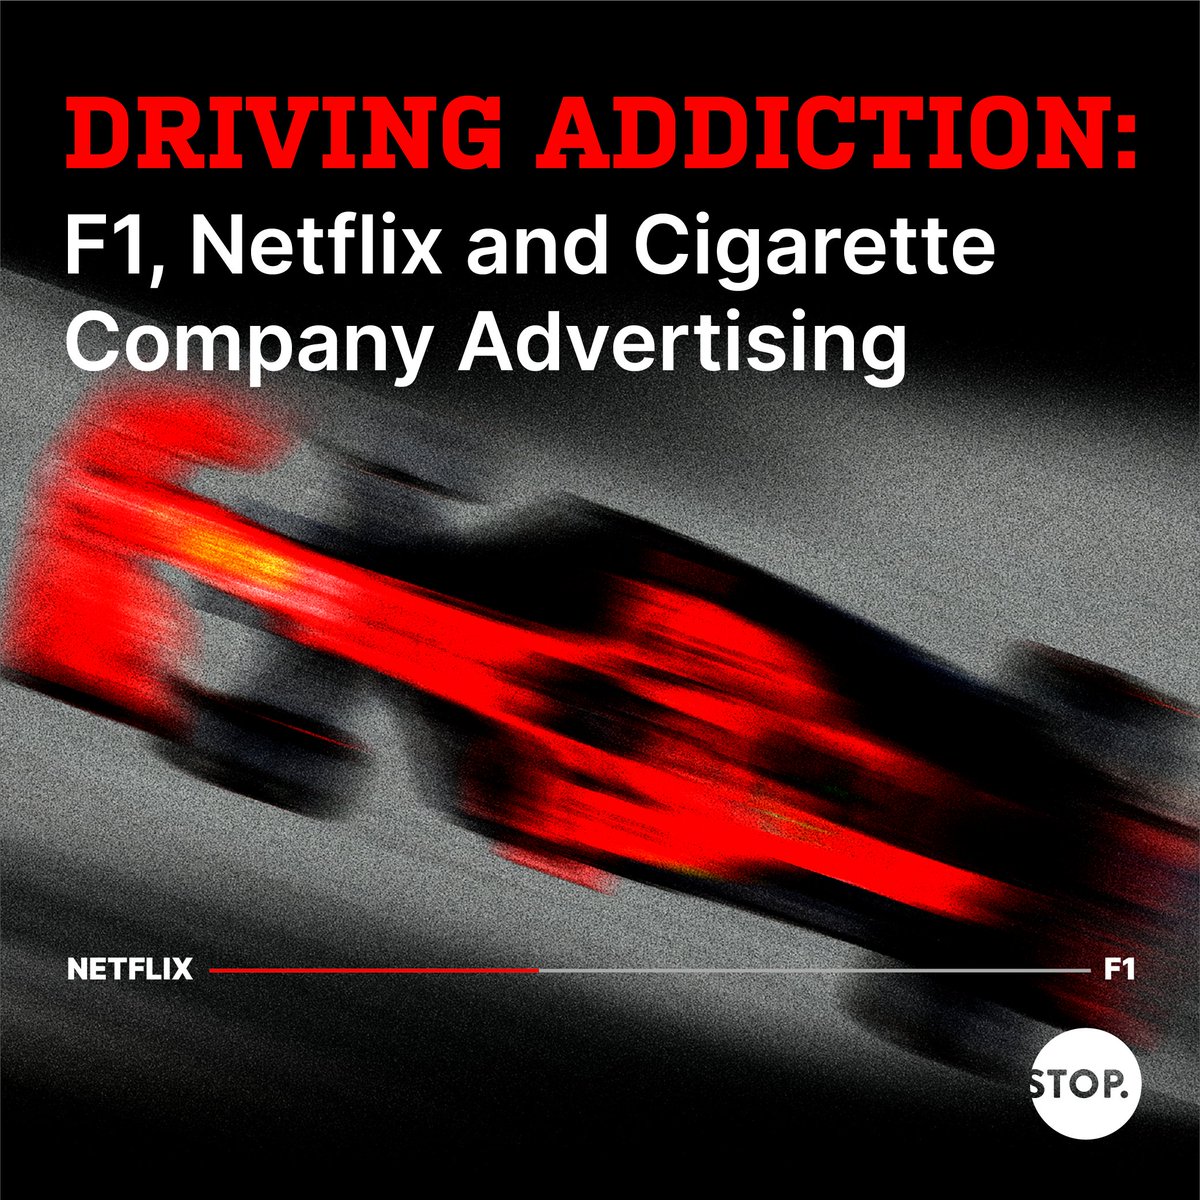 #Netflix: a new vehicle for global cigarette company branding. @ExposeTobacco’s NEW #DrivingAddiction report exposes how two of the world's biggest cigarette companies are reaching young audiences through the hit documentary series F1: Drive to Survive. bit.ly/3mj2Js7